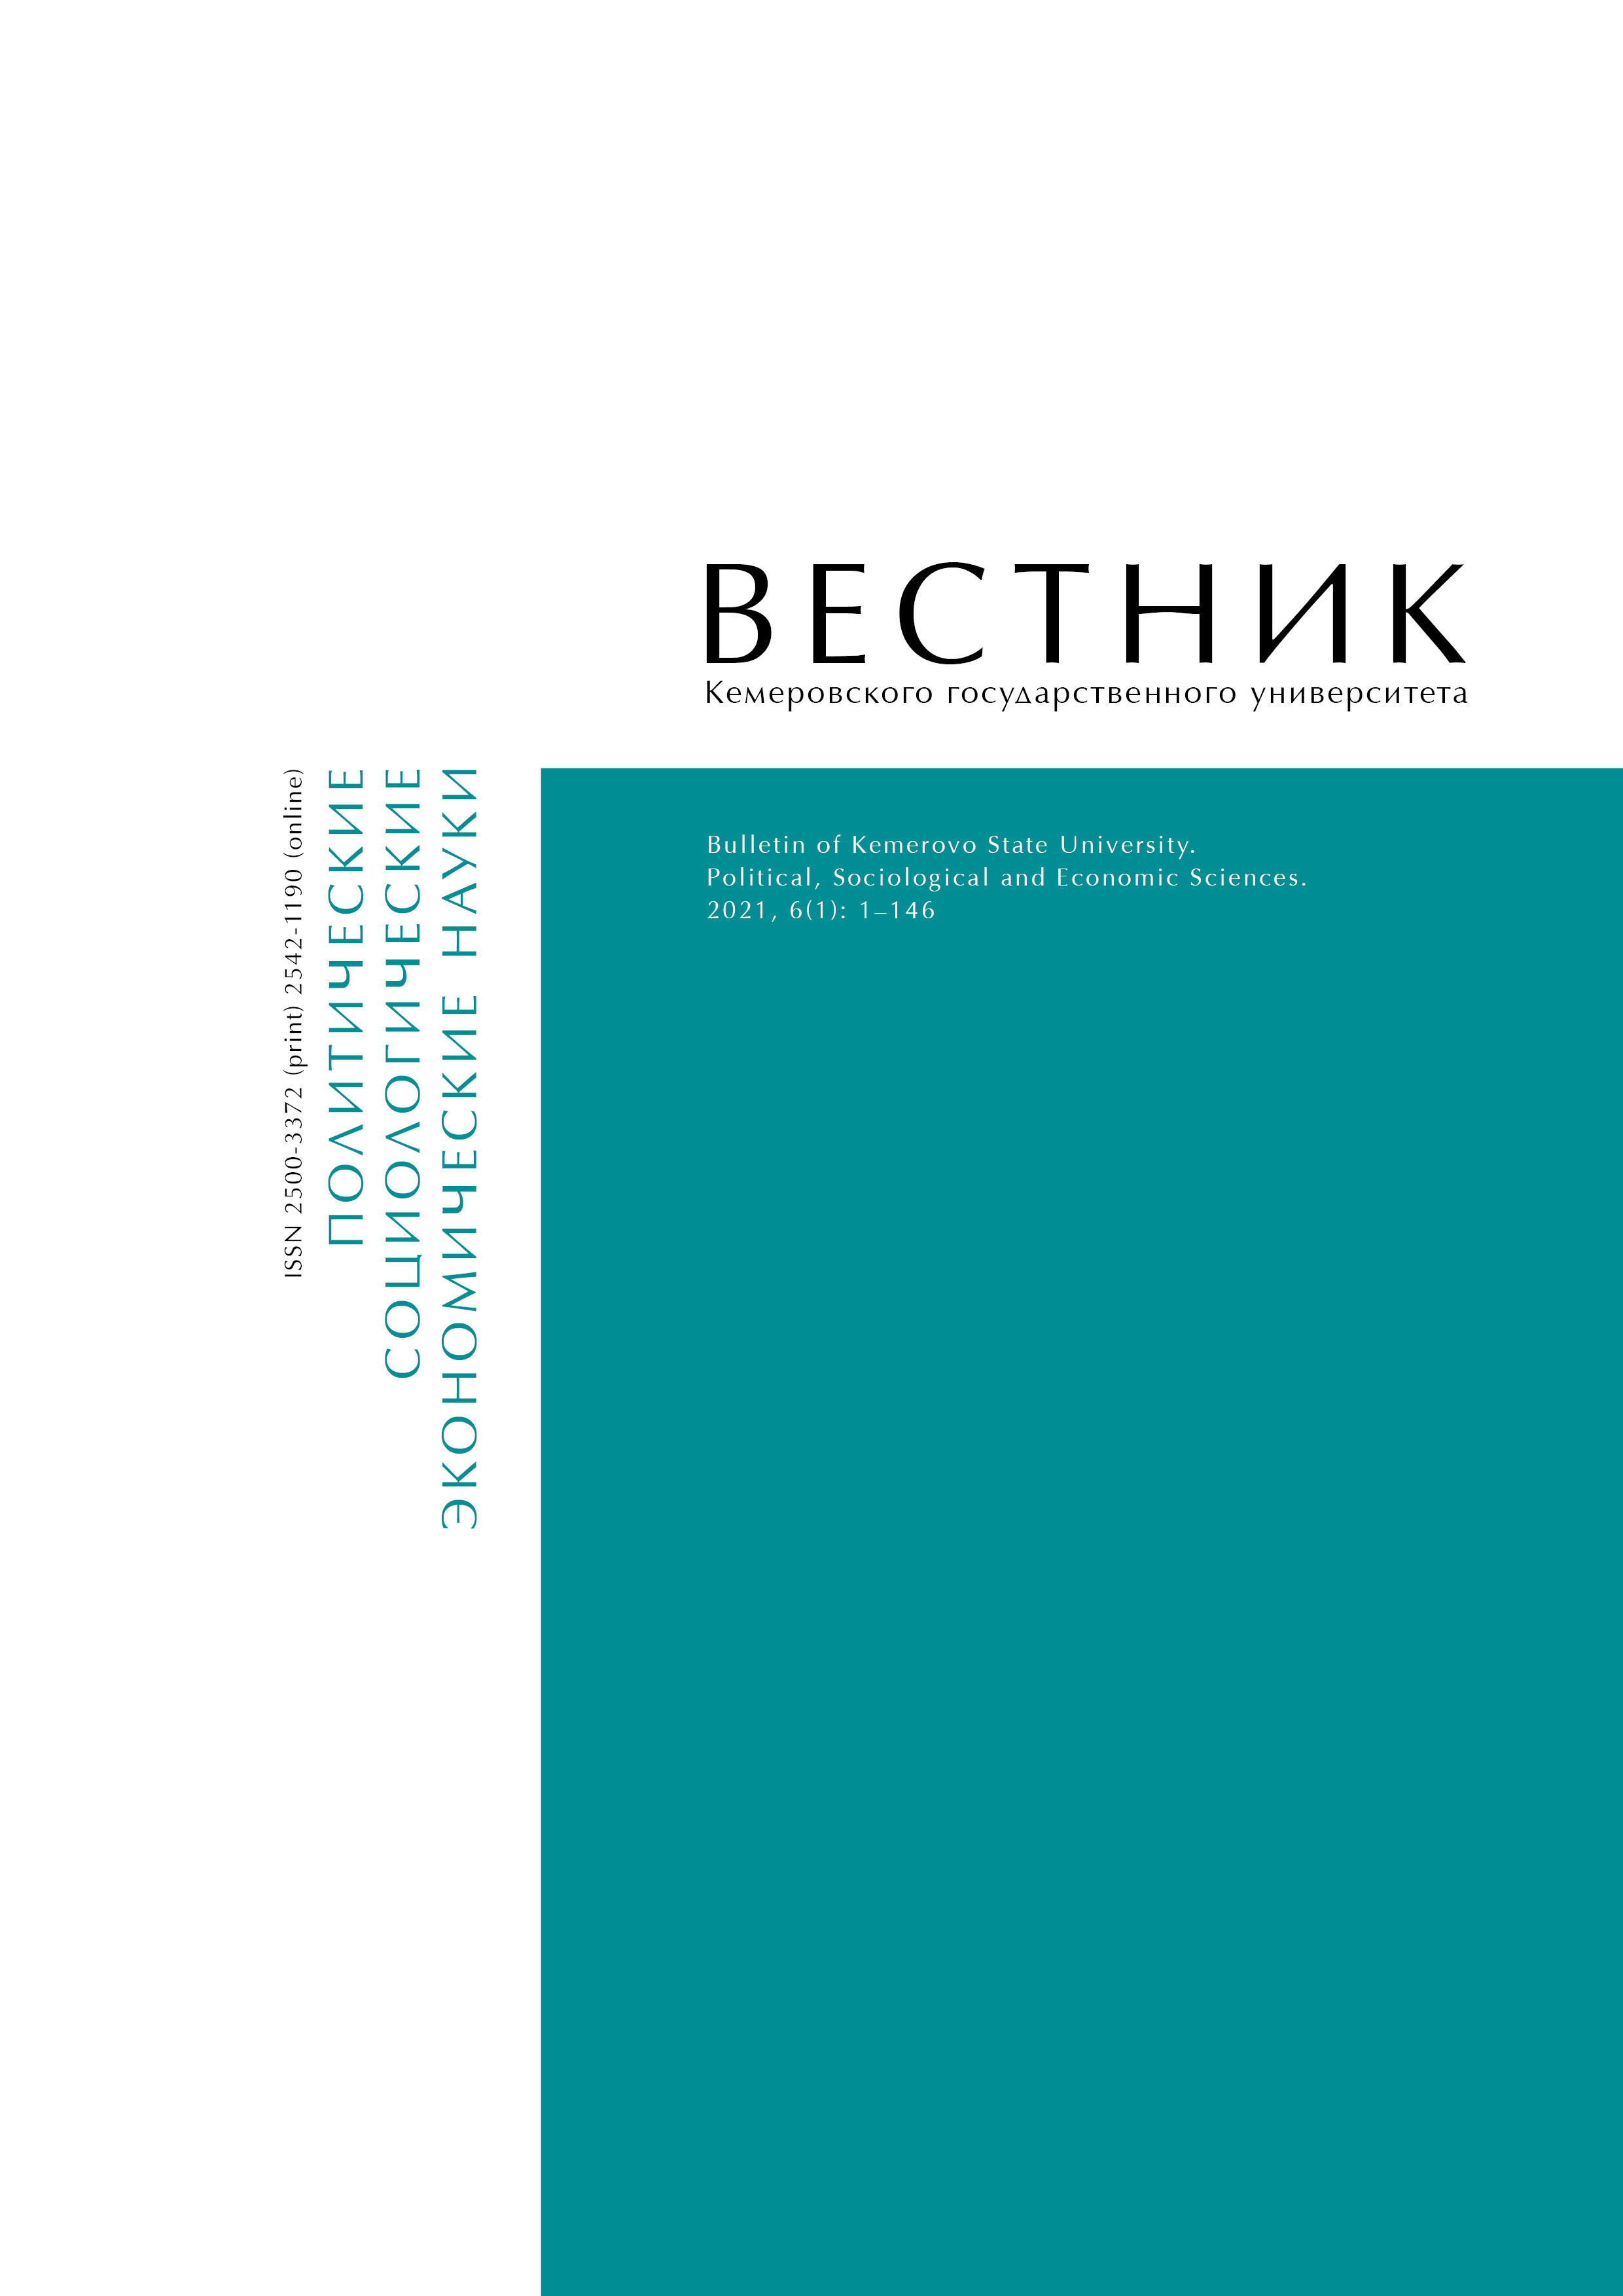             Bulletin of Kemerovo State University. Series: Political, Sociological and Economic sciences
    